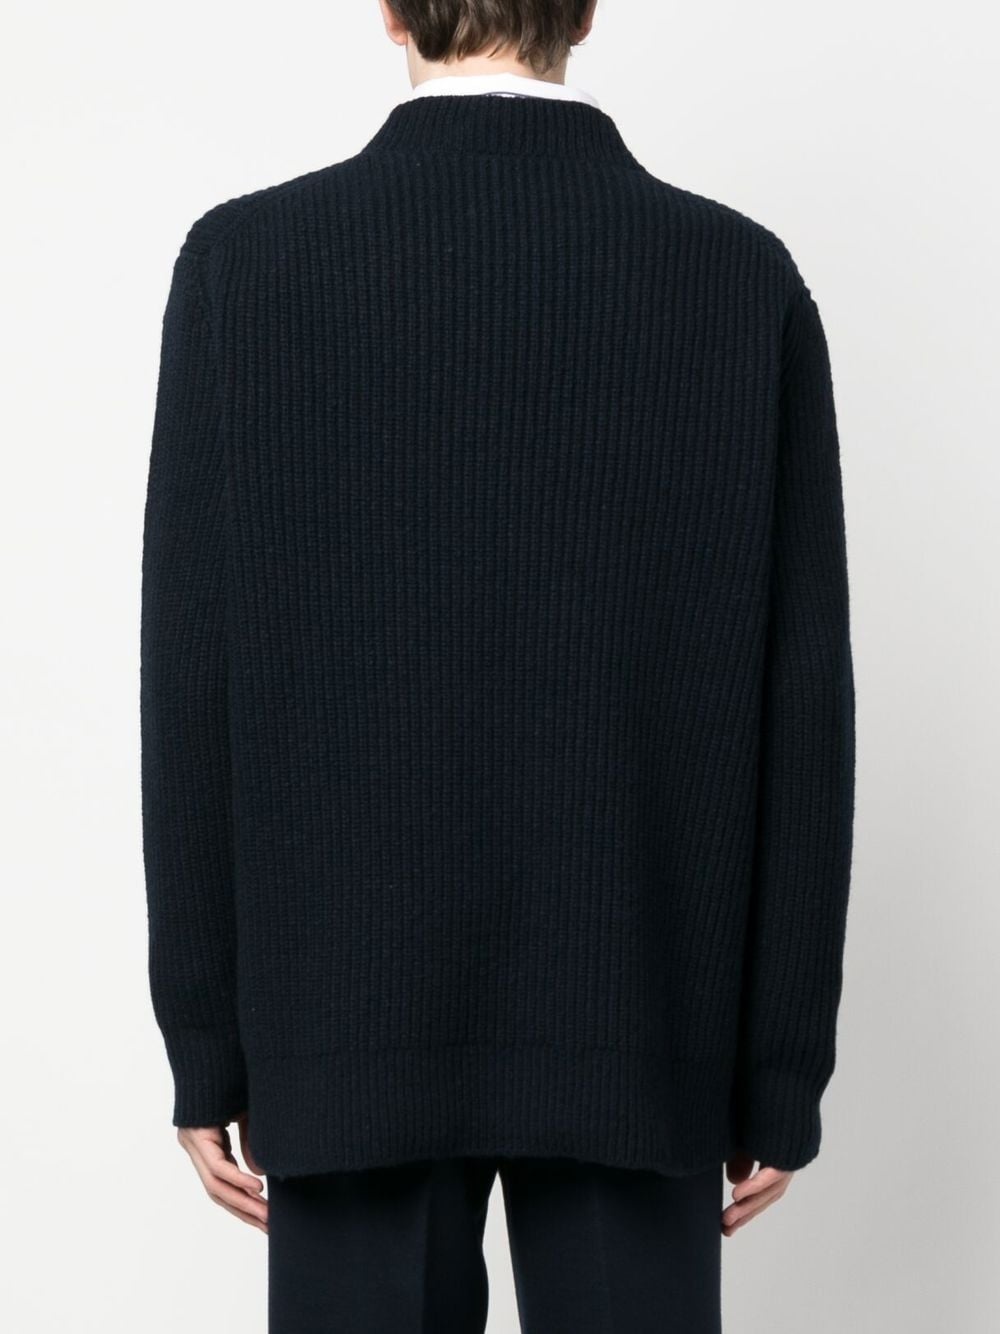 high-neck knitted pullover - 4